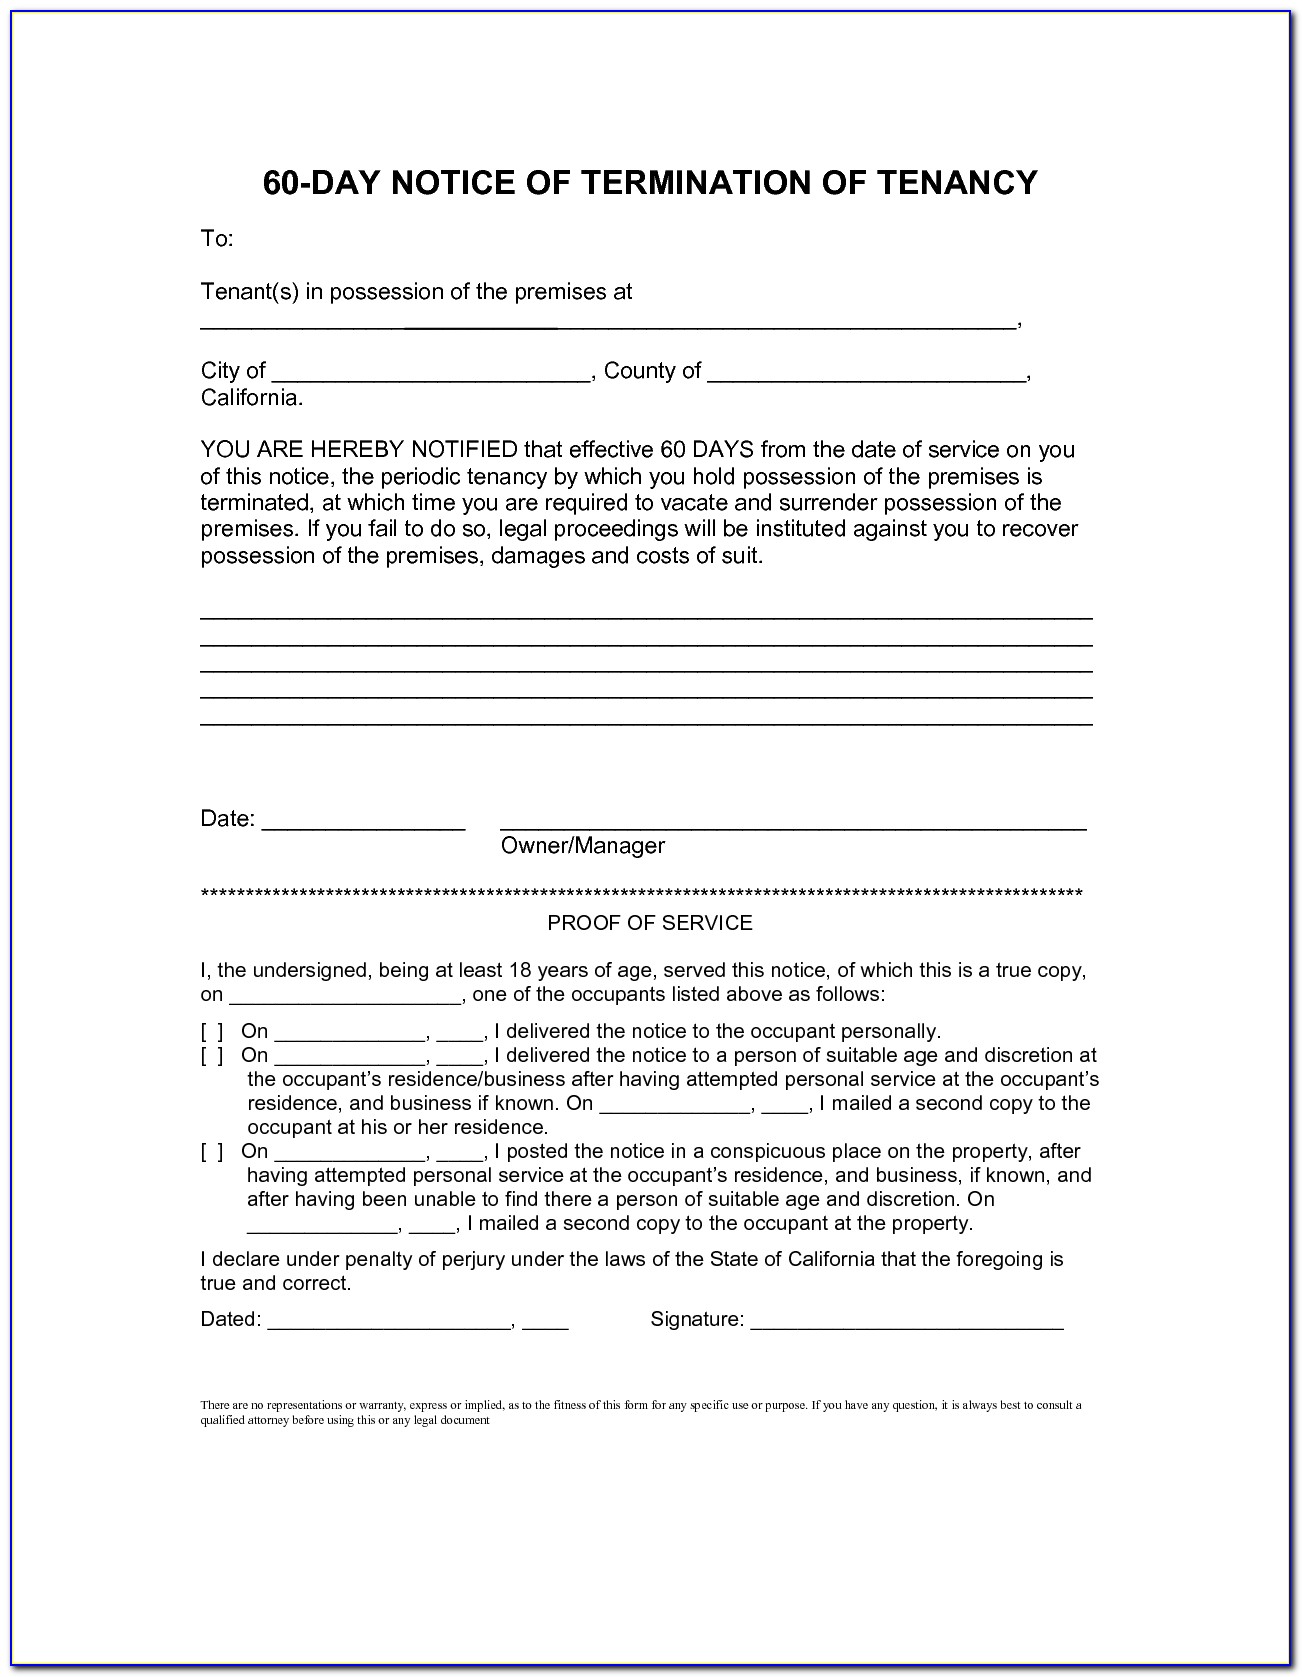 Eviction Notice Letter Free Download Ledger Form Proposal Template With 60 Day Notice To Vacate Template 2018